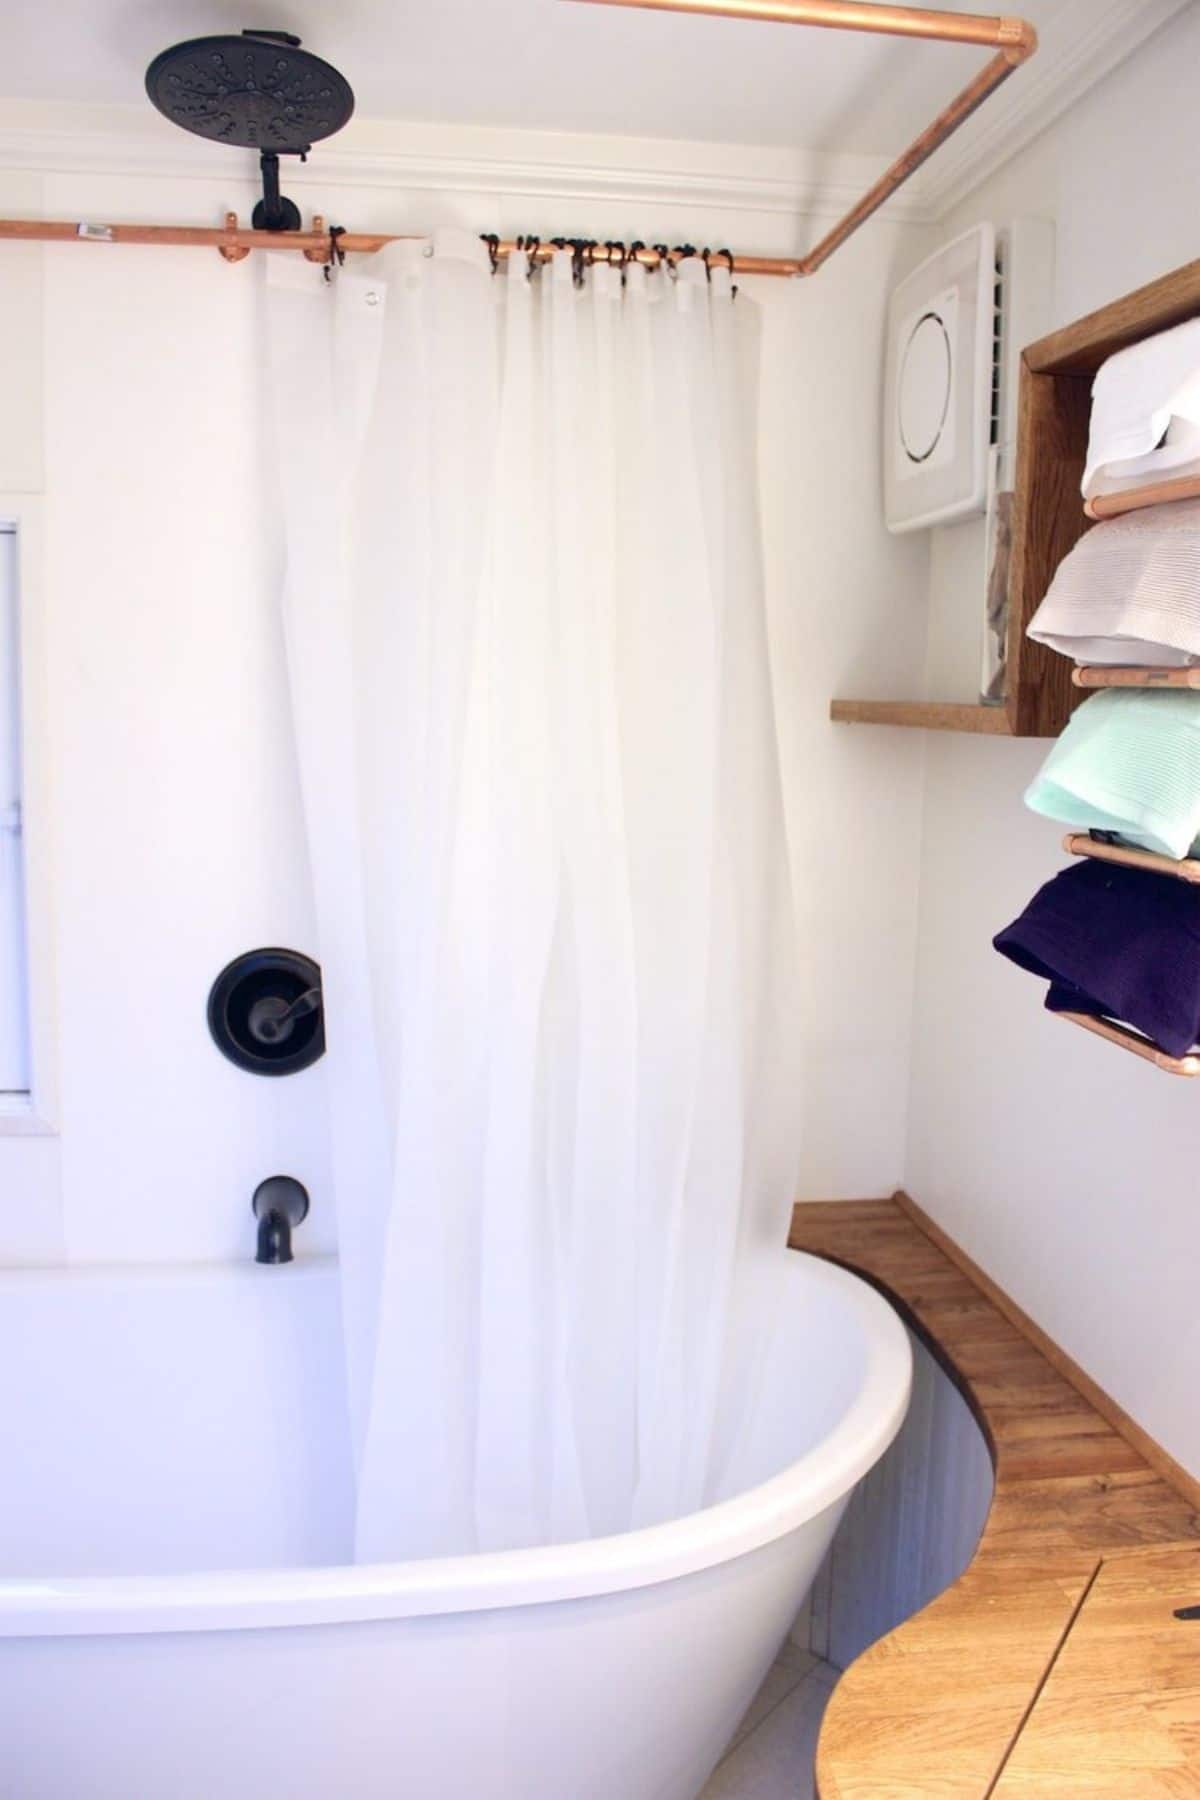 White clawfoot bathtub with shower curtain pulled